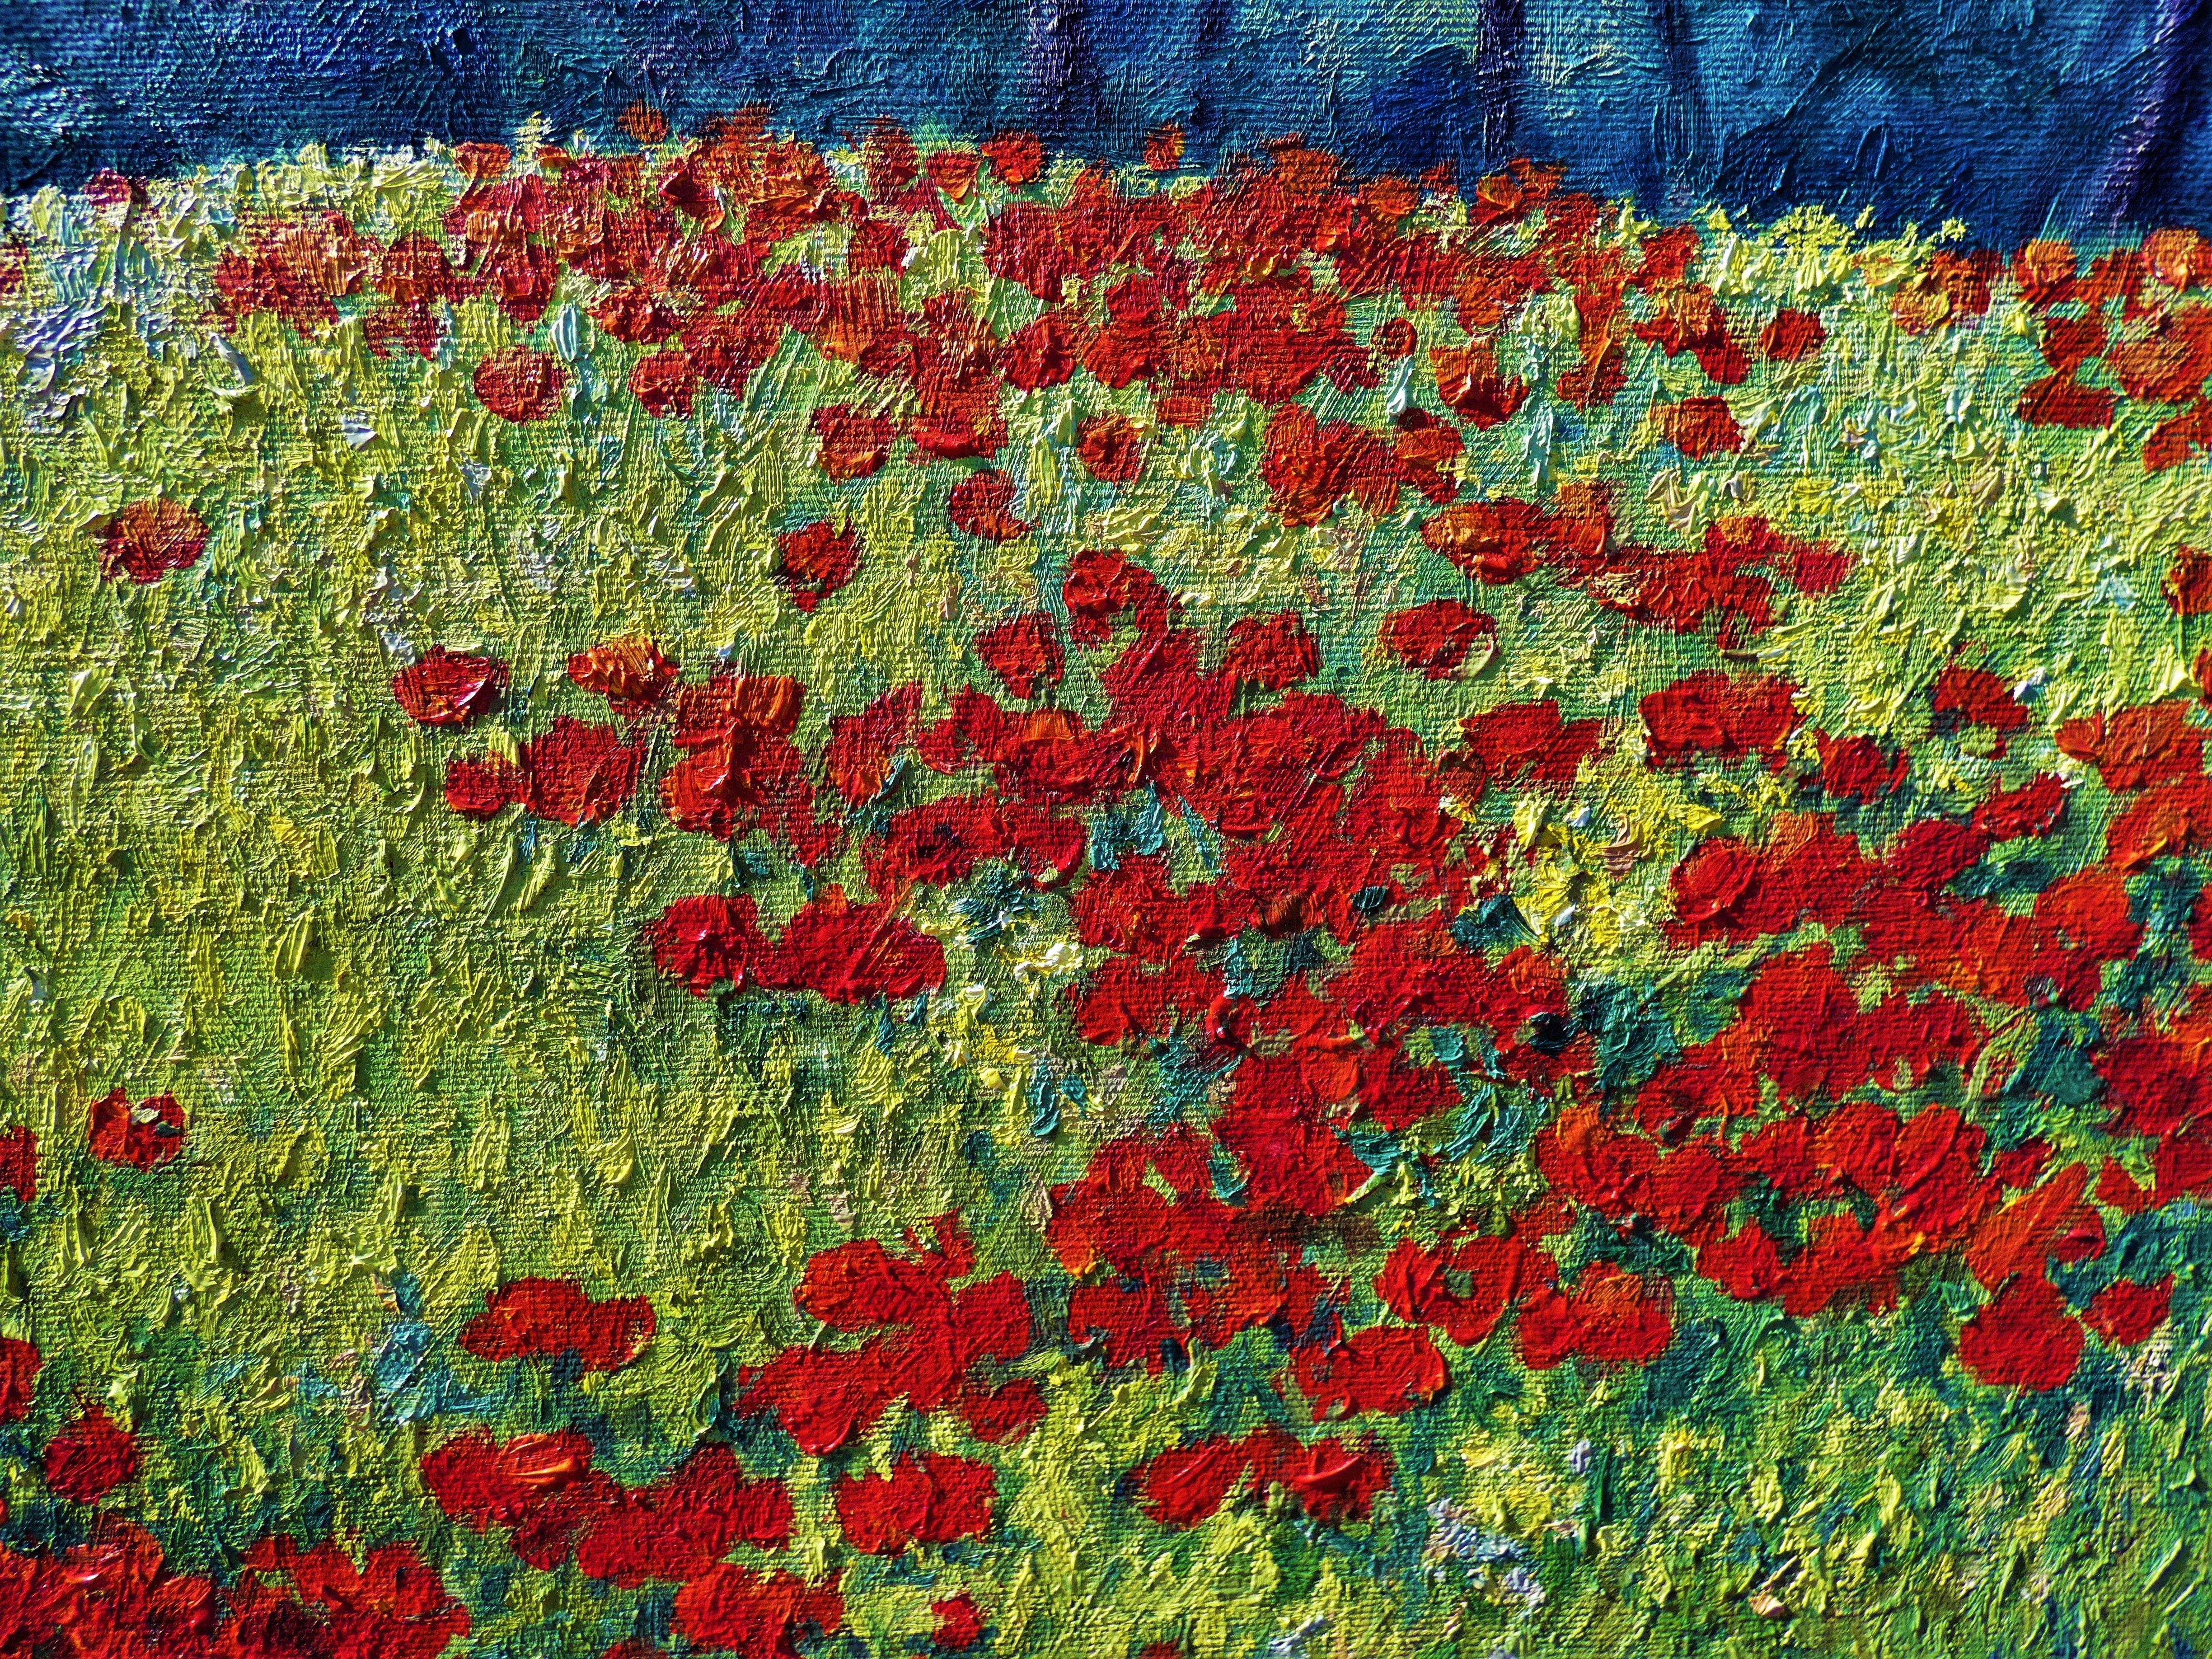 paintings of poppies by famous artists